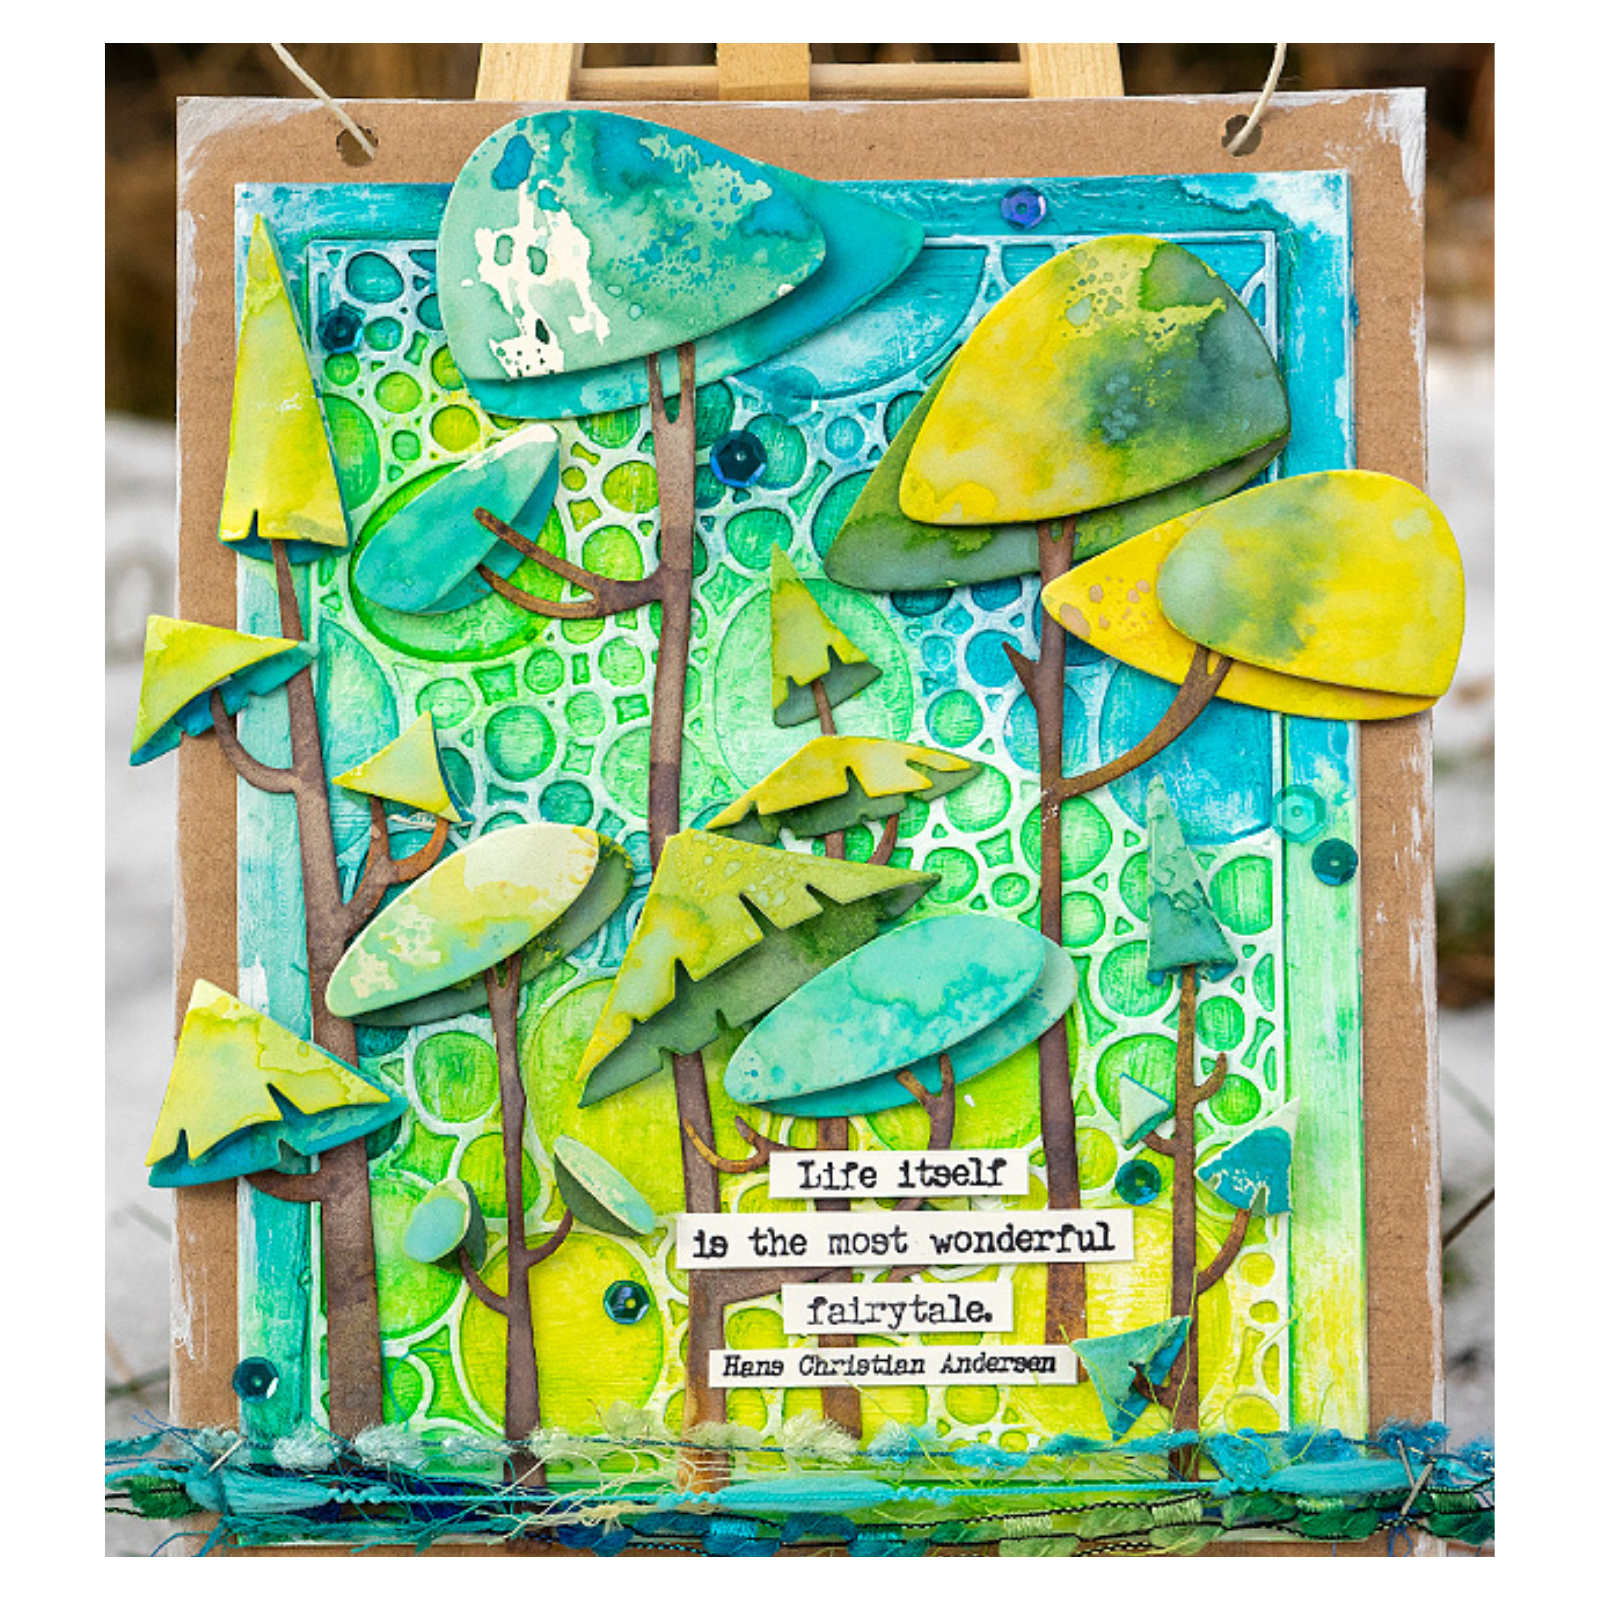 Tim Holtz Funky Trees Dies - Treetops, Trunks, Shrub, Stems - 665217 - mix & match to create your own style of tree & shrub